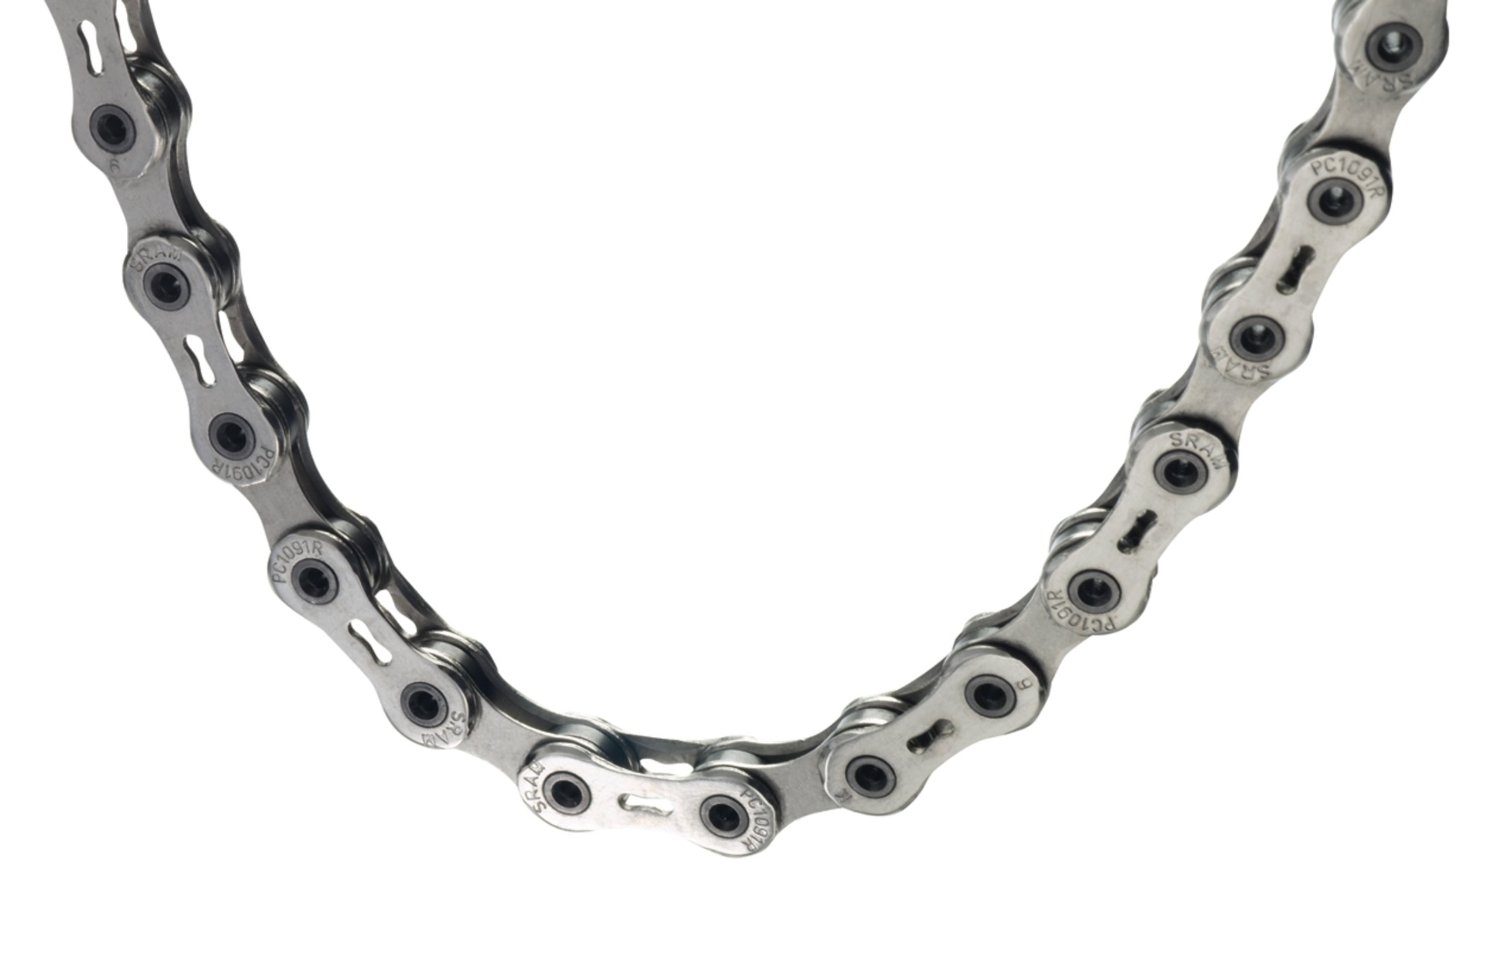 Steel 10 Speed 116 Links MTB Bicycle Chain Durable Outdoor Riding Accessory #JD 